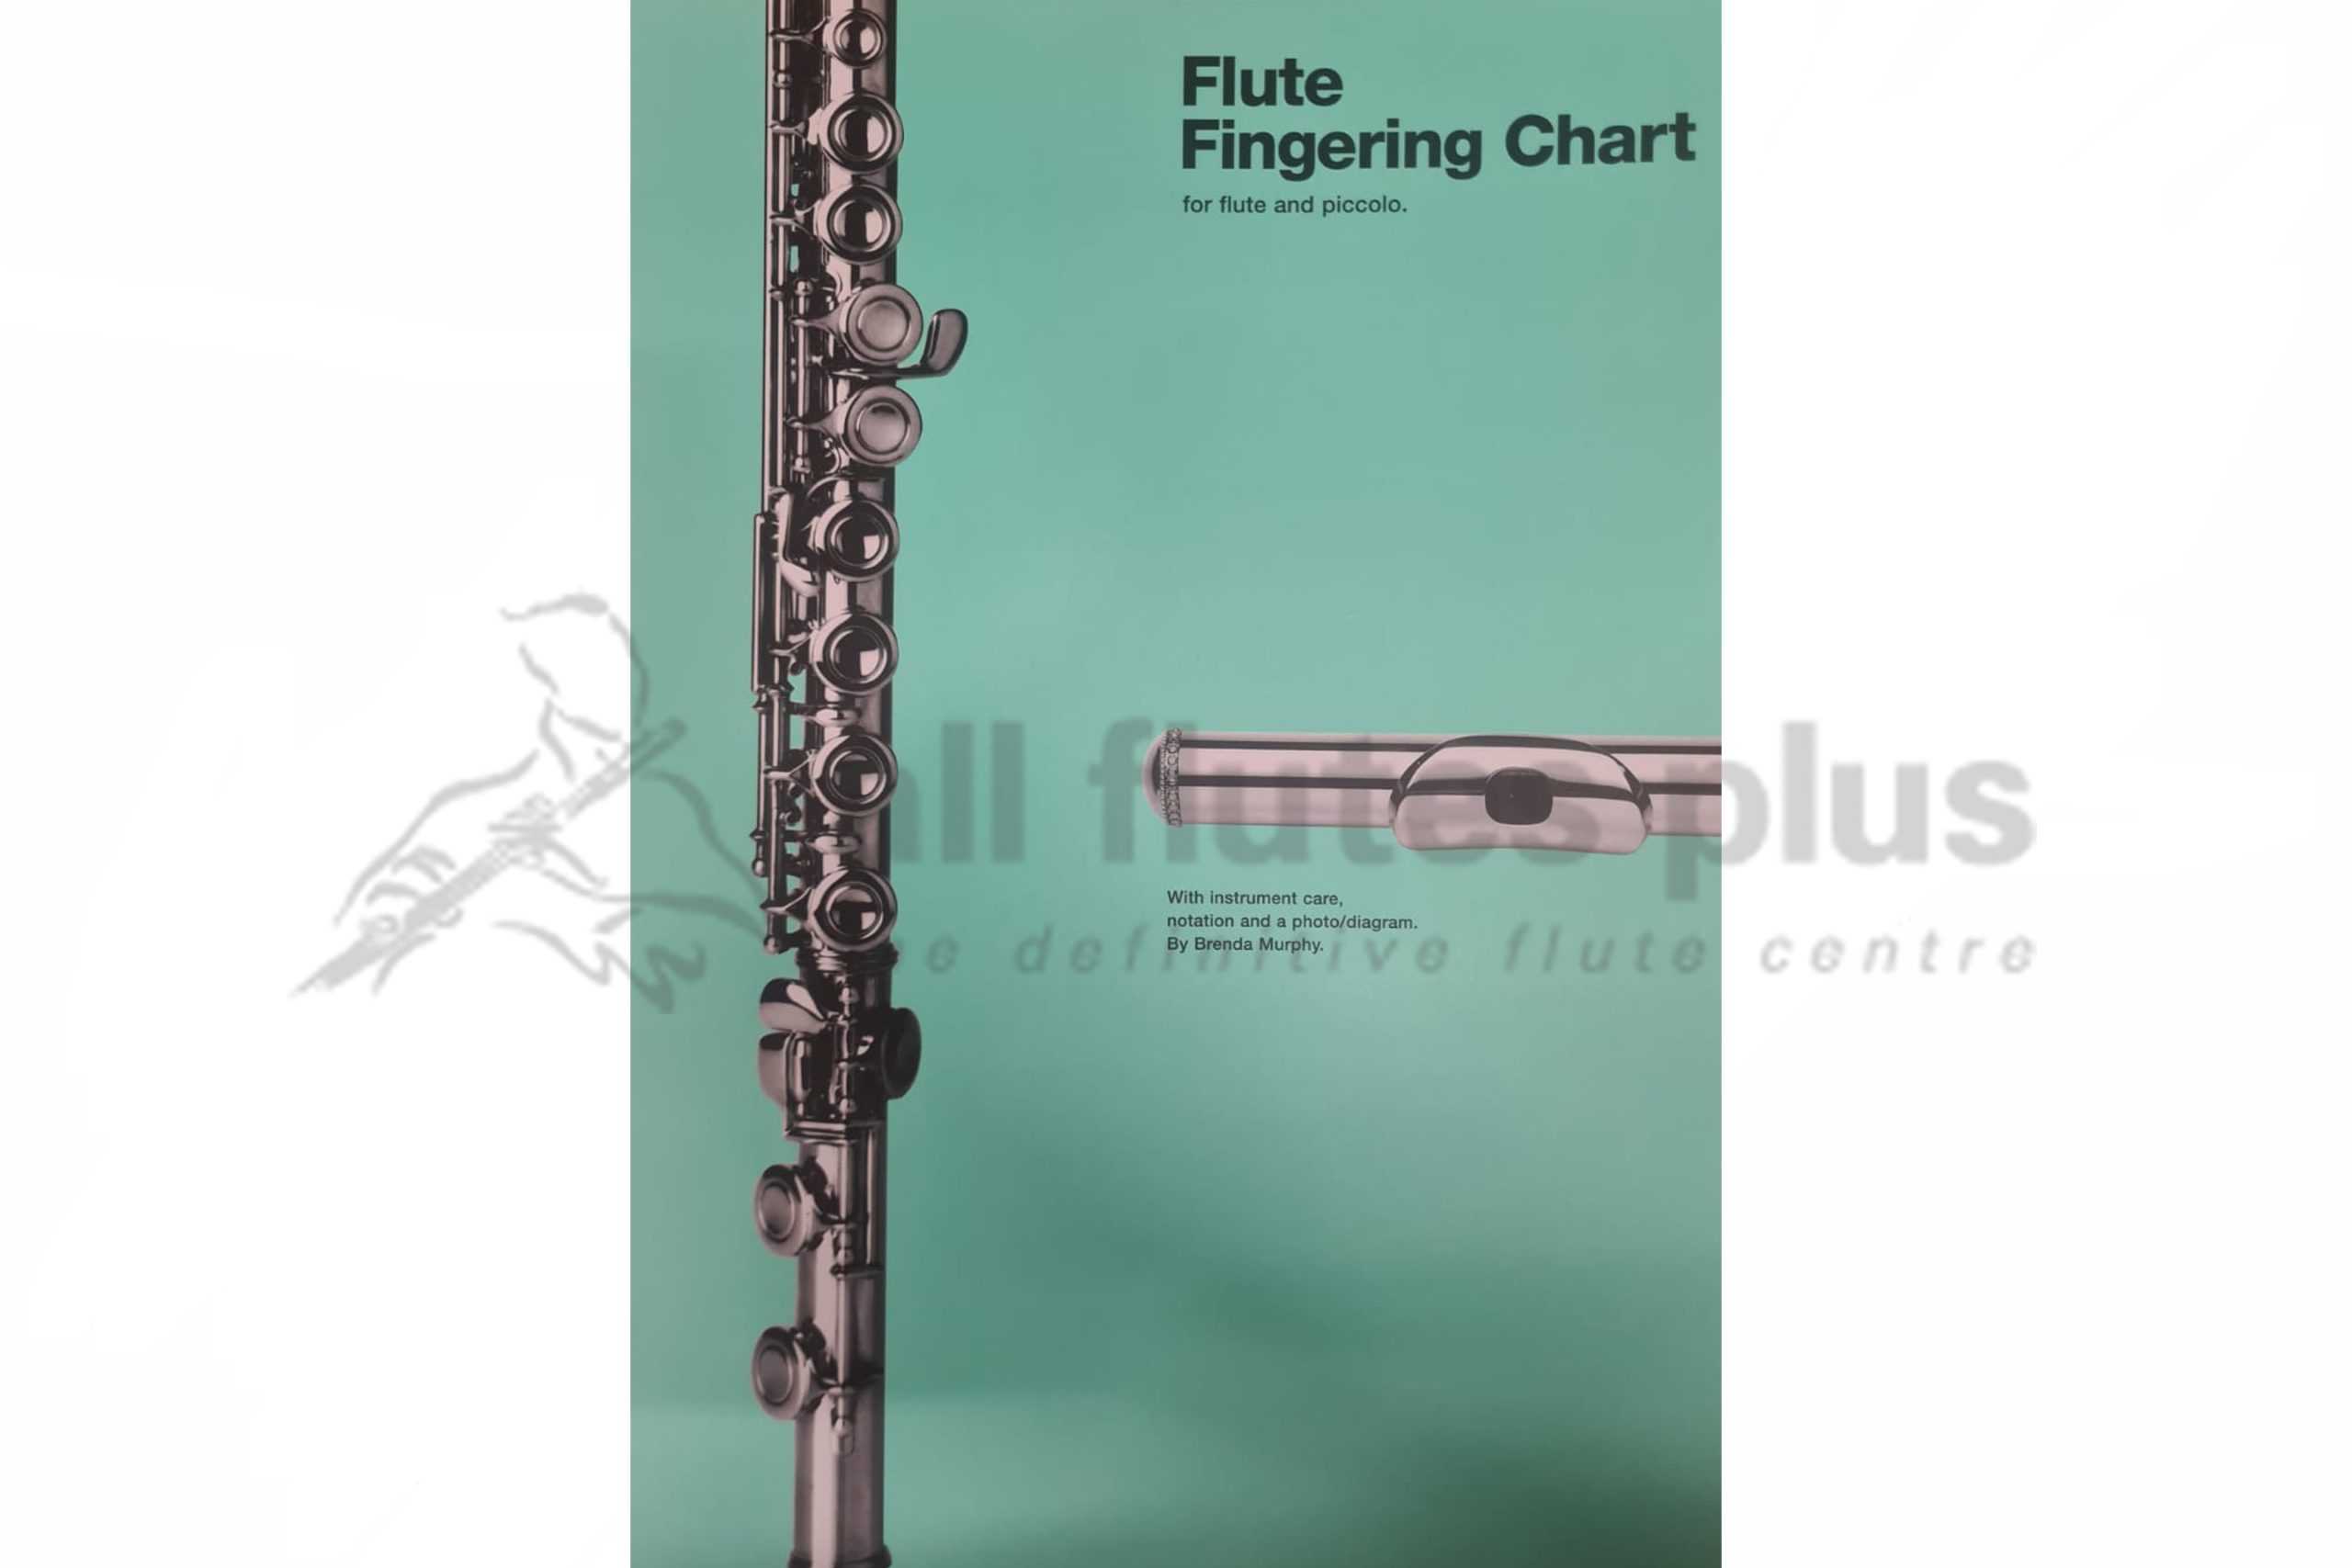 Flute Fingering Chart for Flute and Piccolo